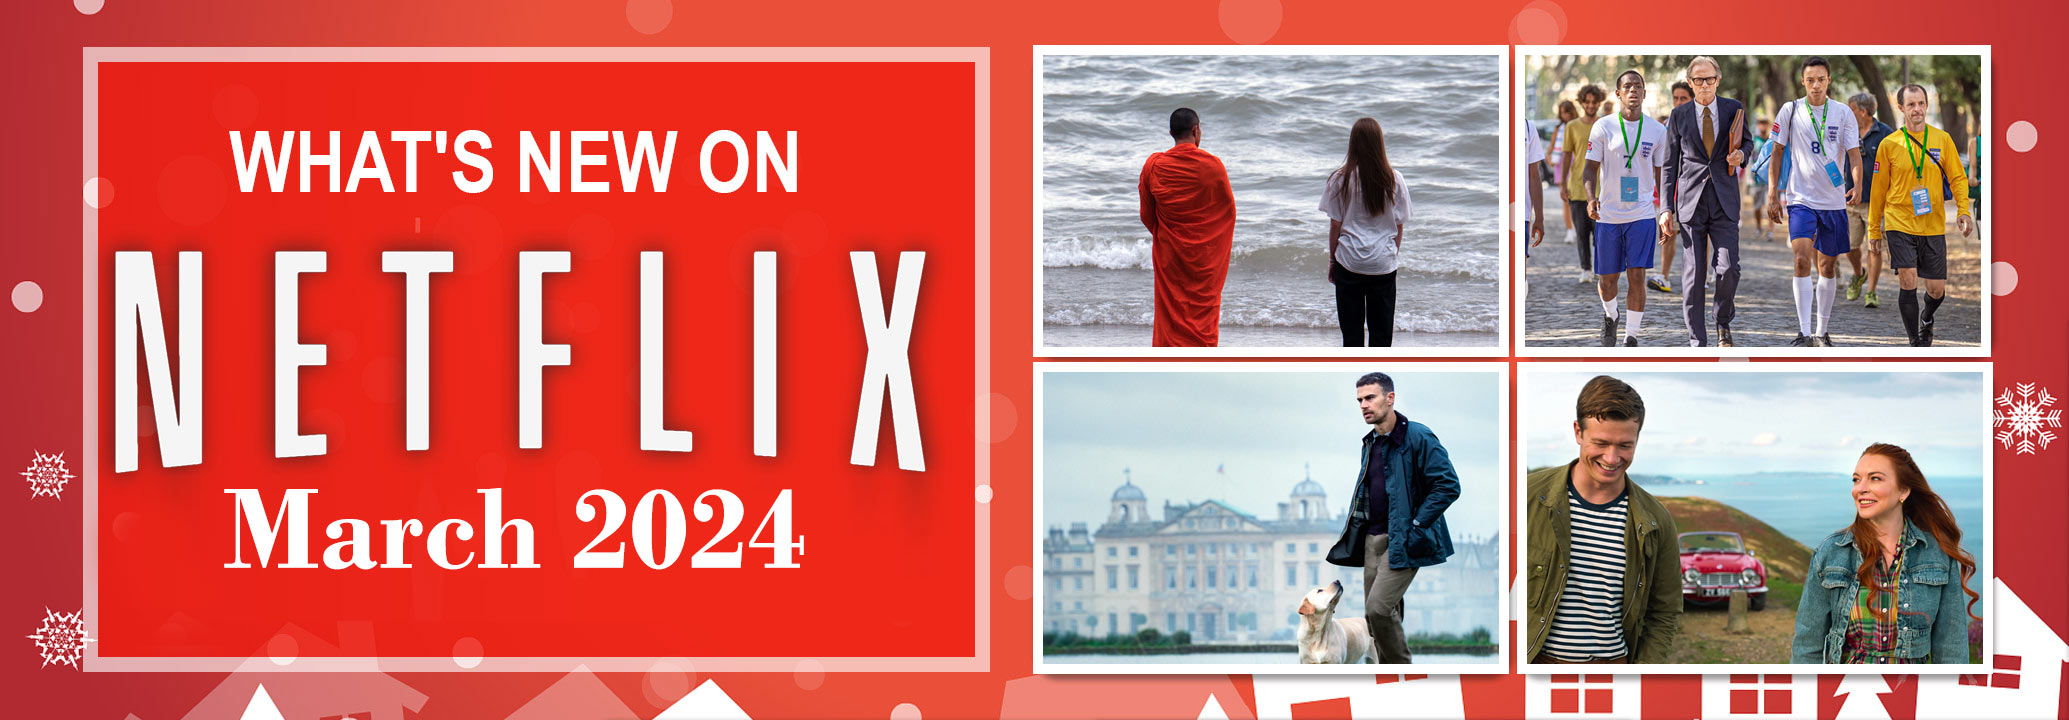 What’s New on Netflix March 2024